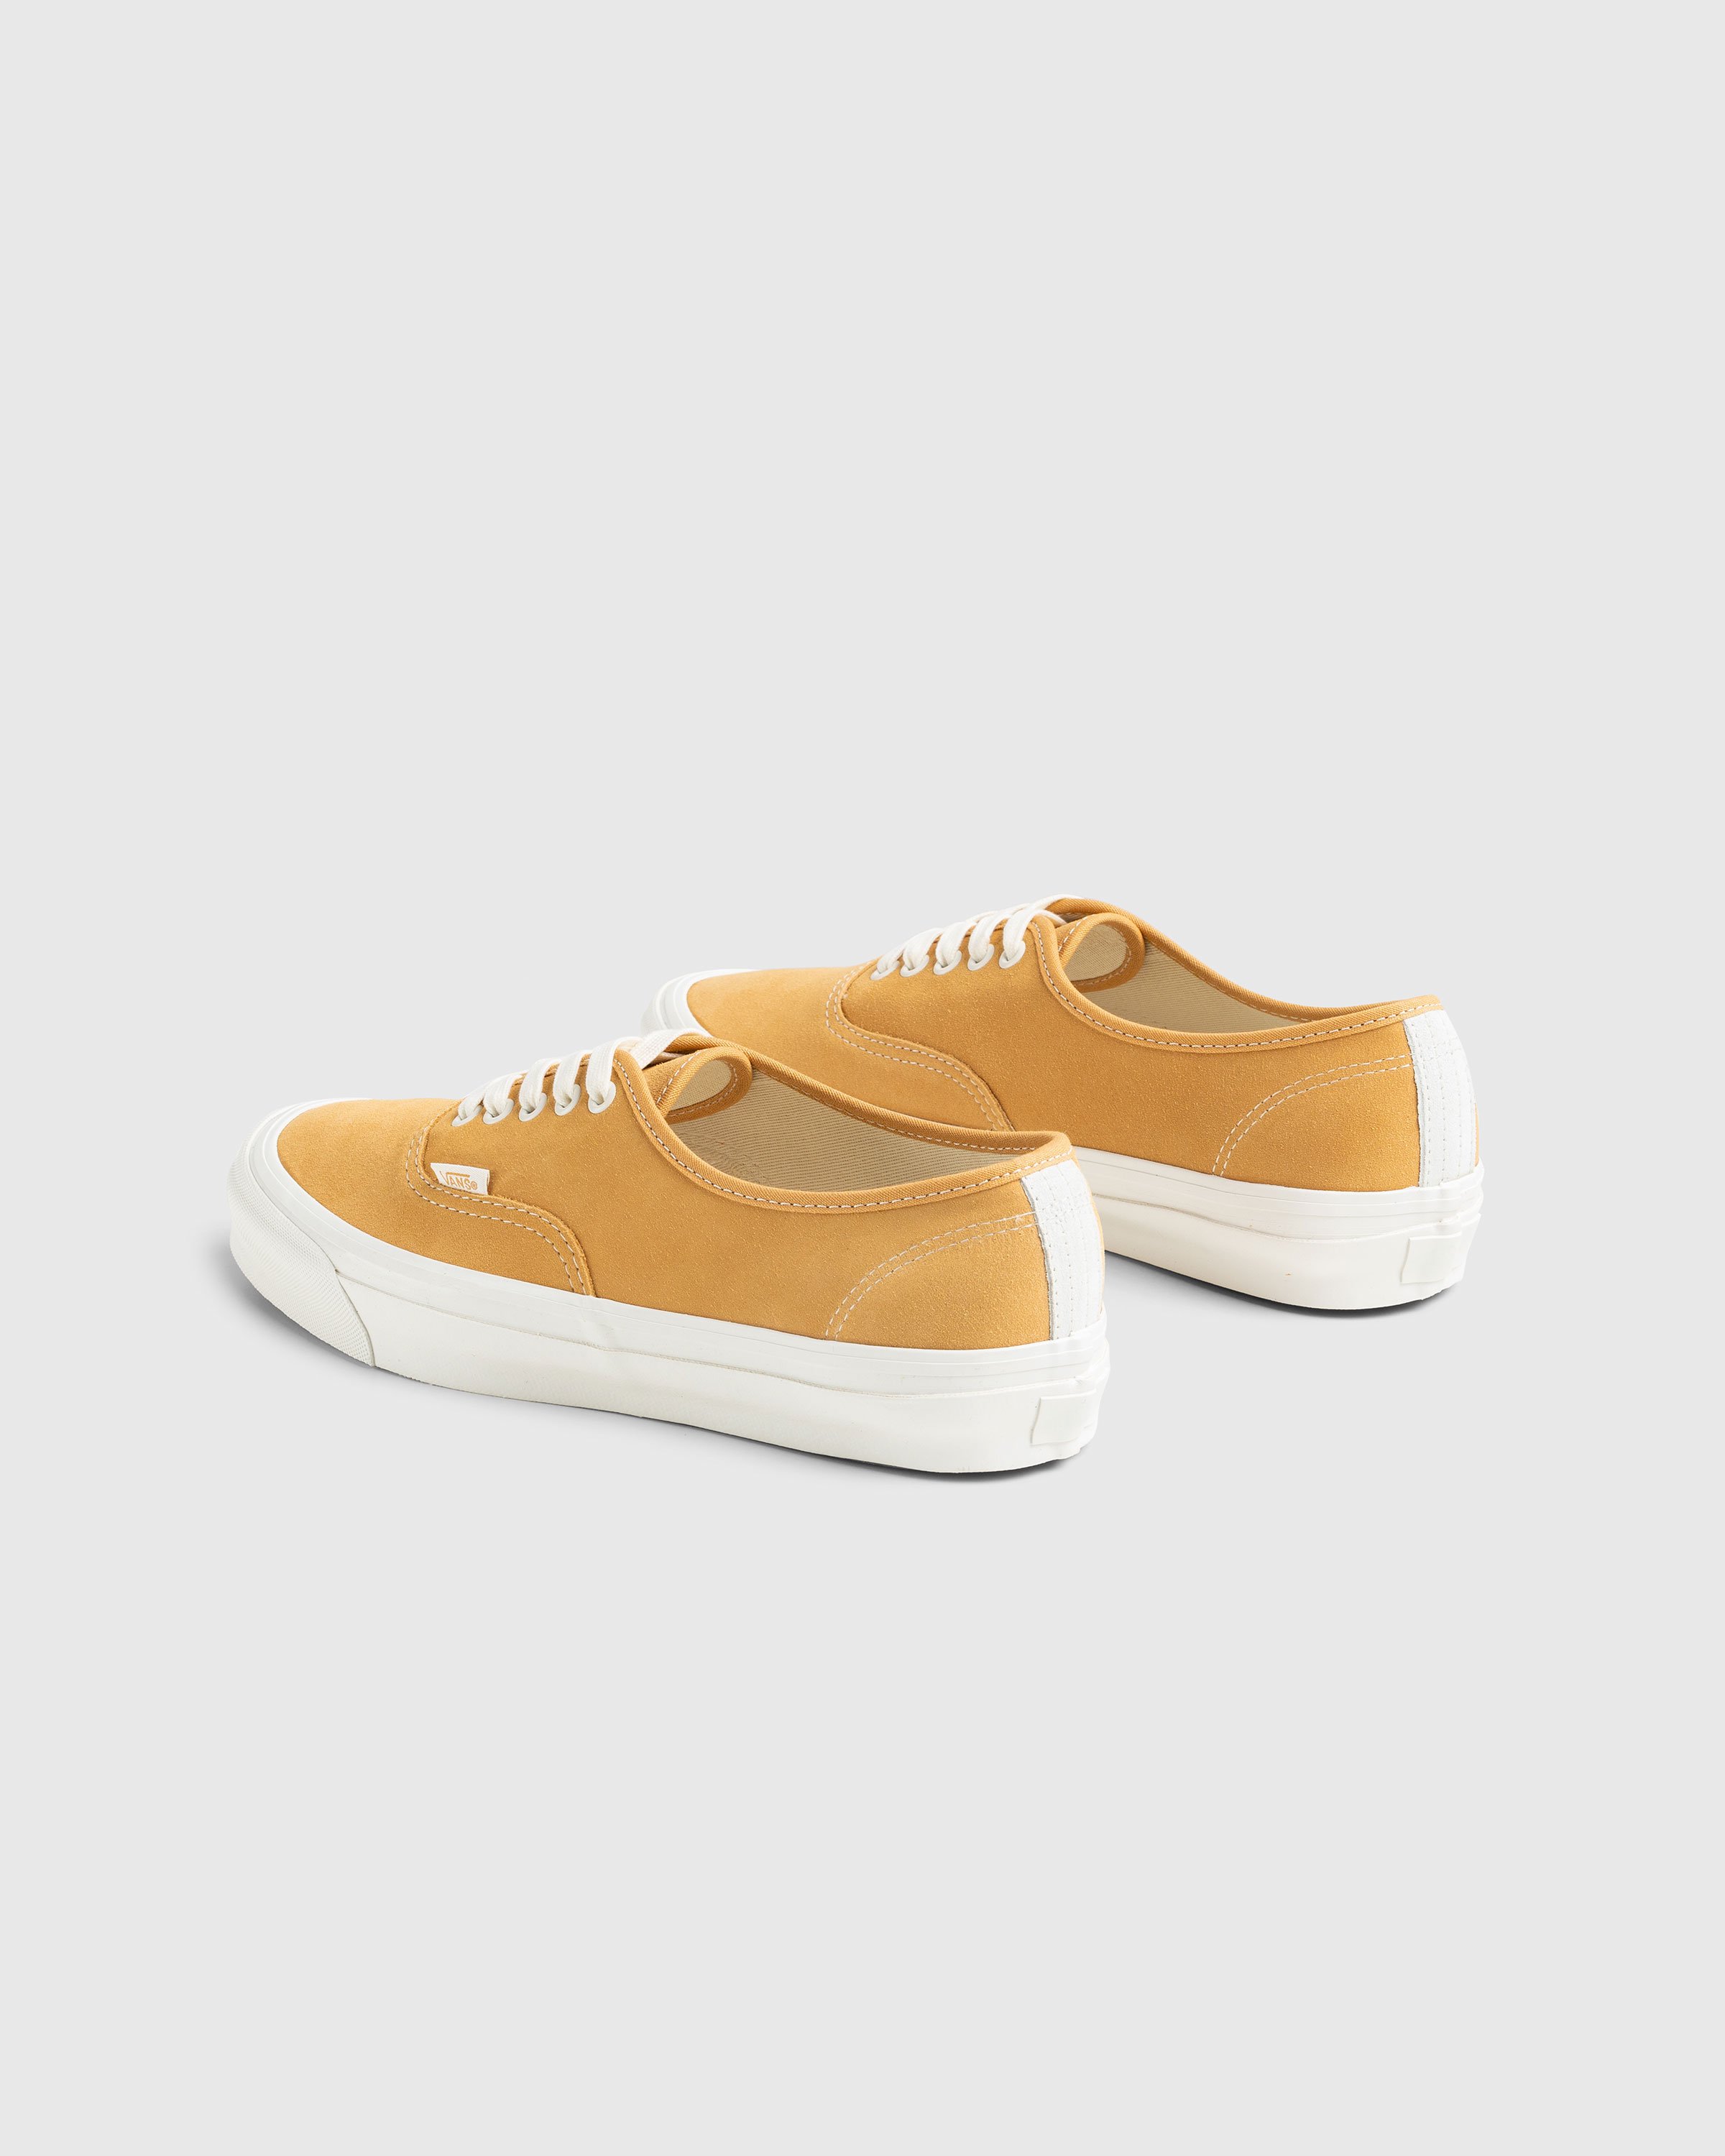 Vans - UA OG Authentic LX Suede Yellow - Footwear - Yellow - Image 4